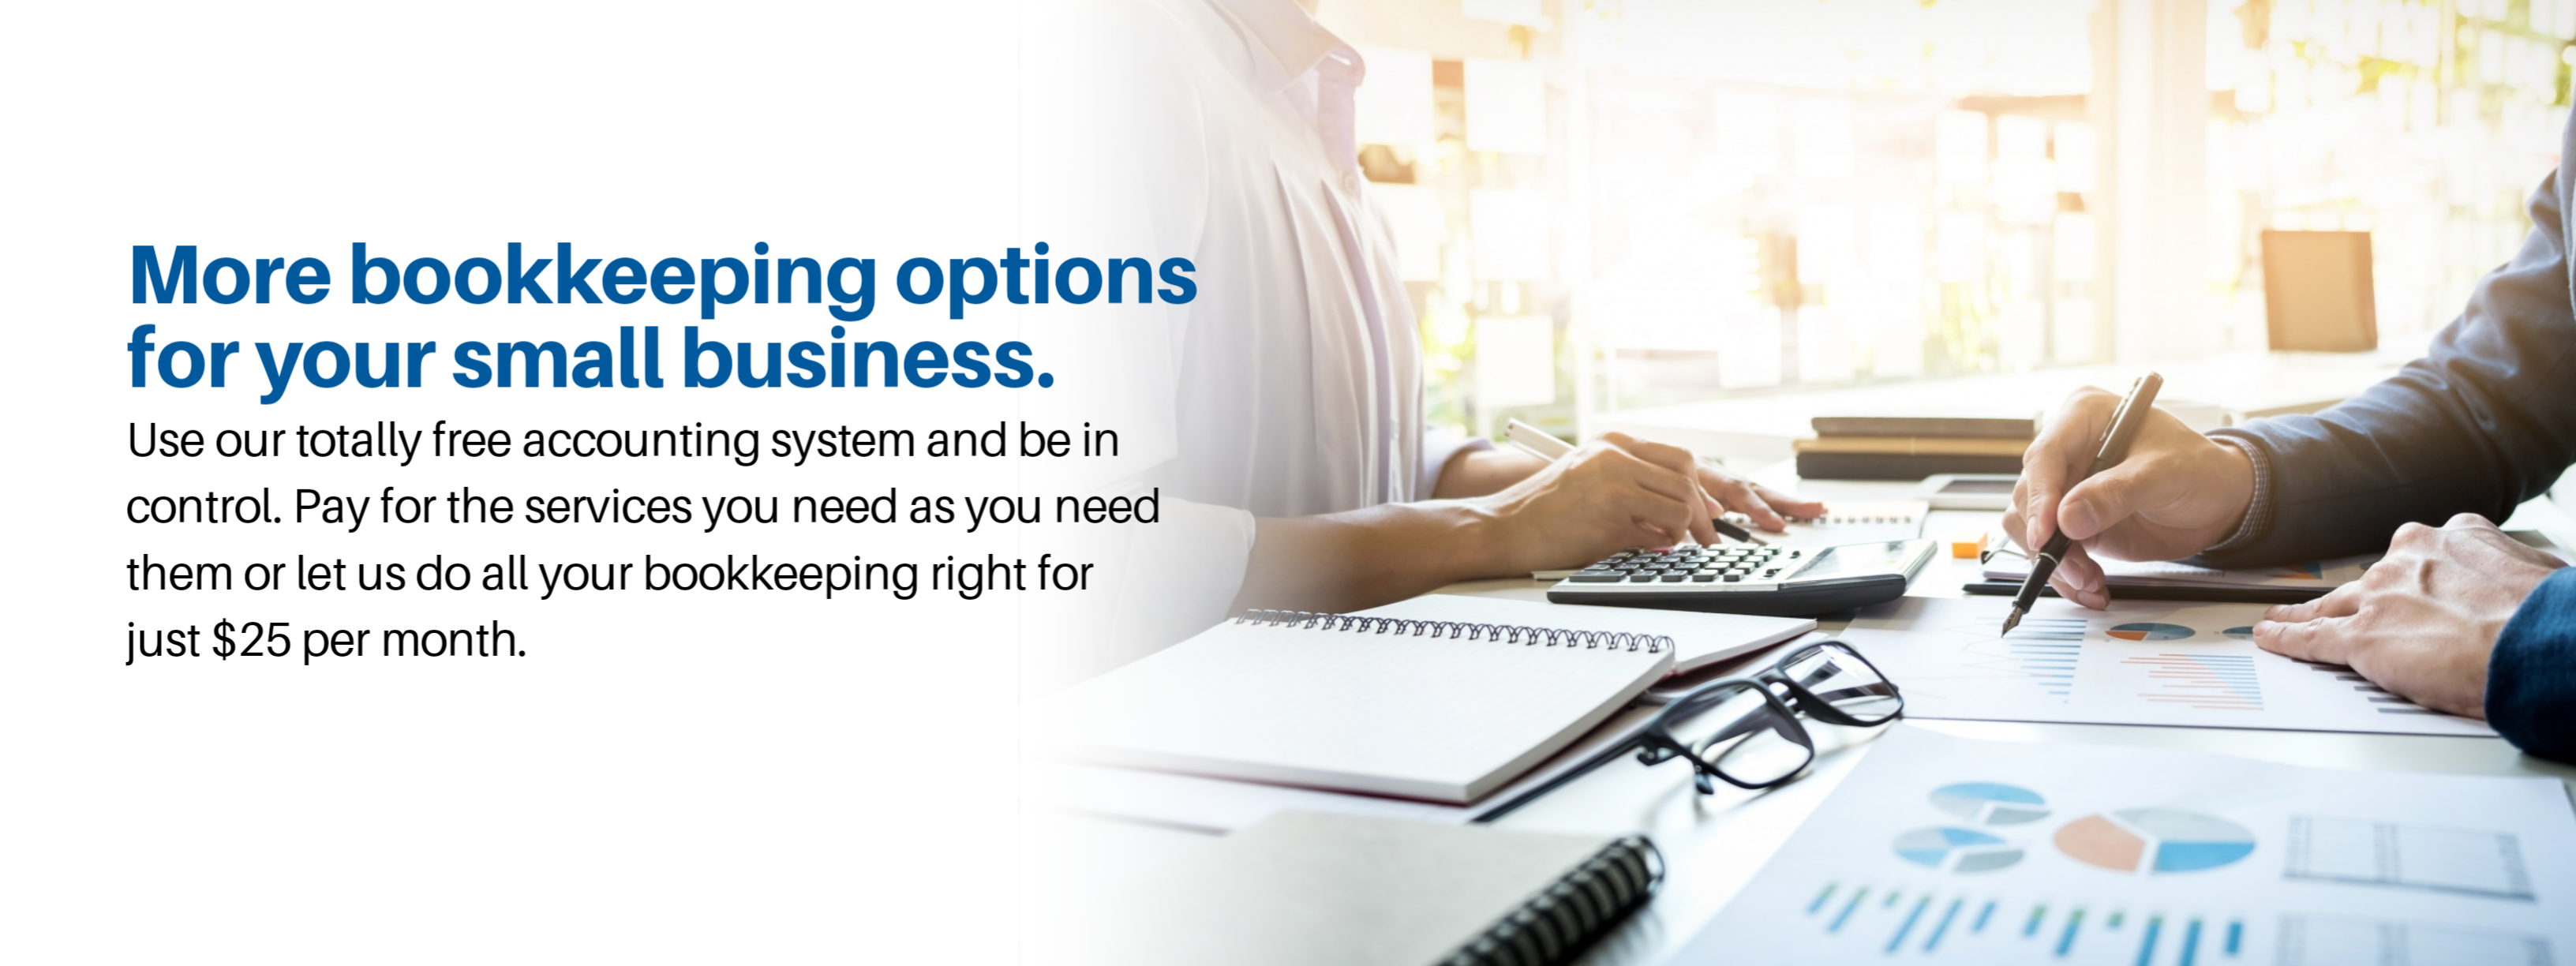 More bookkeeping options for your small business.